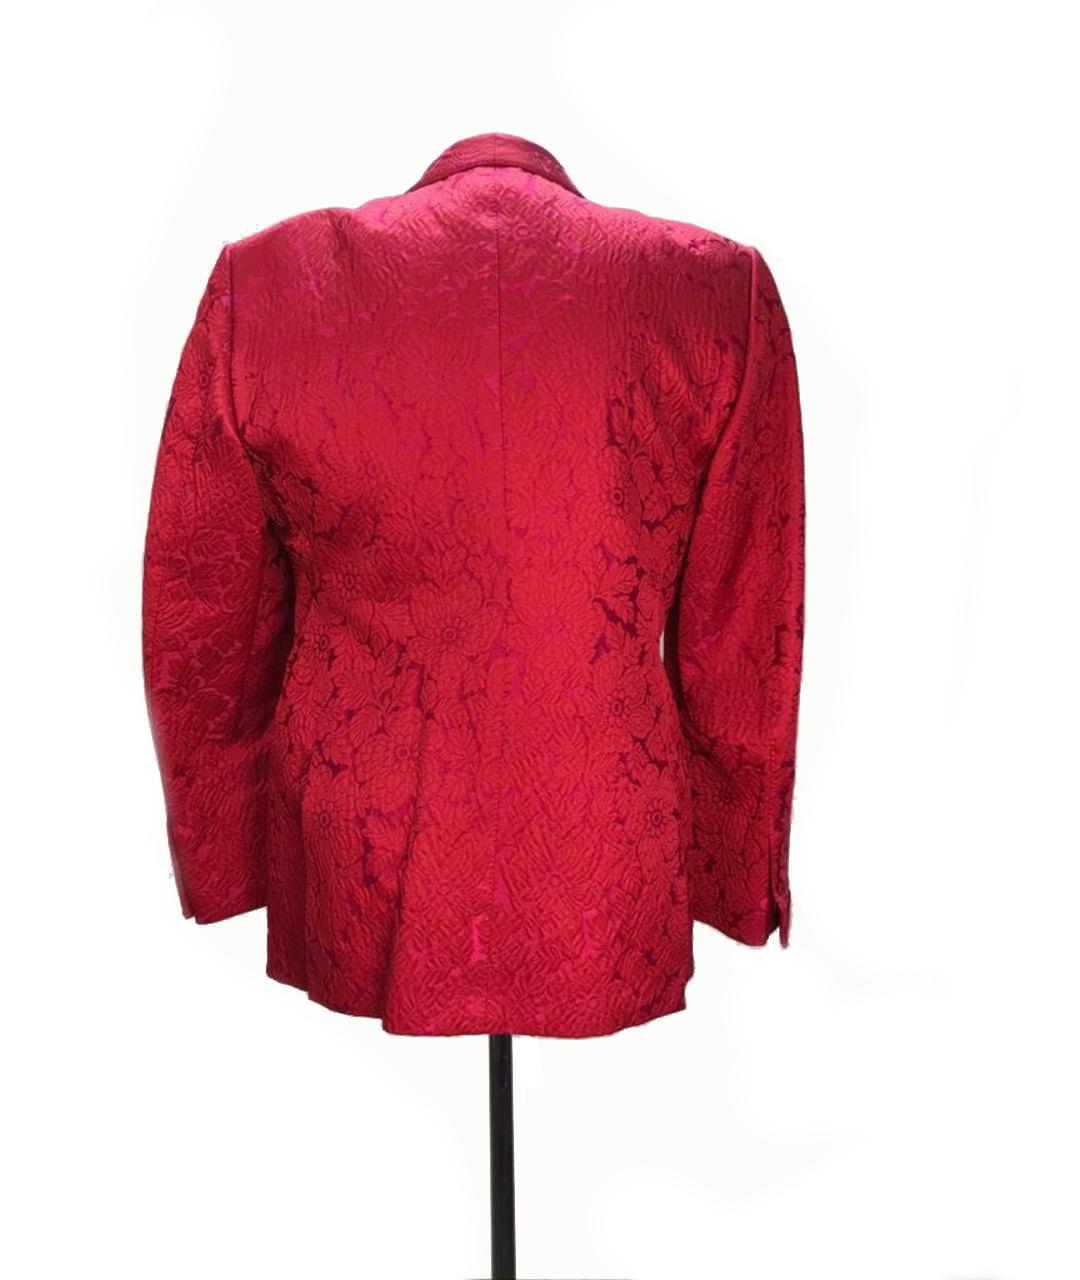 TOM FORD

CORRAL COTTON and SILK JACKET with FLORAL PRINT
One button closure 
Content: 54% cotton, 41% silk, 5% polyamid
Lining: 50 rayon cupro, 50% silk

EU 58 - US 4XL

Made in Italy

 Brand new, without tags.

 100% authentic guarantee 
os
 